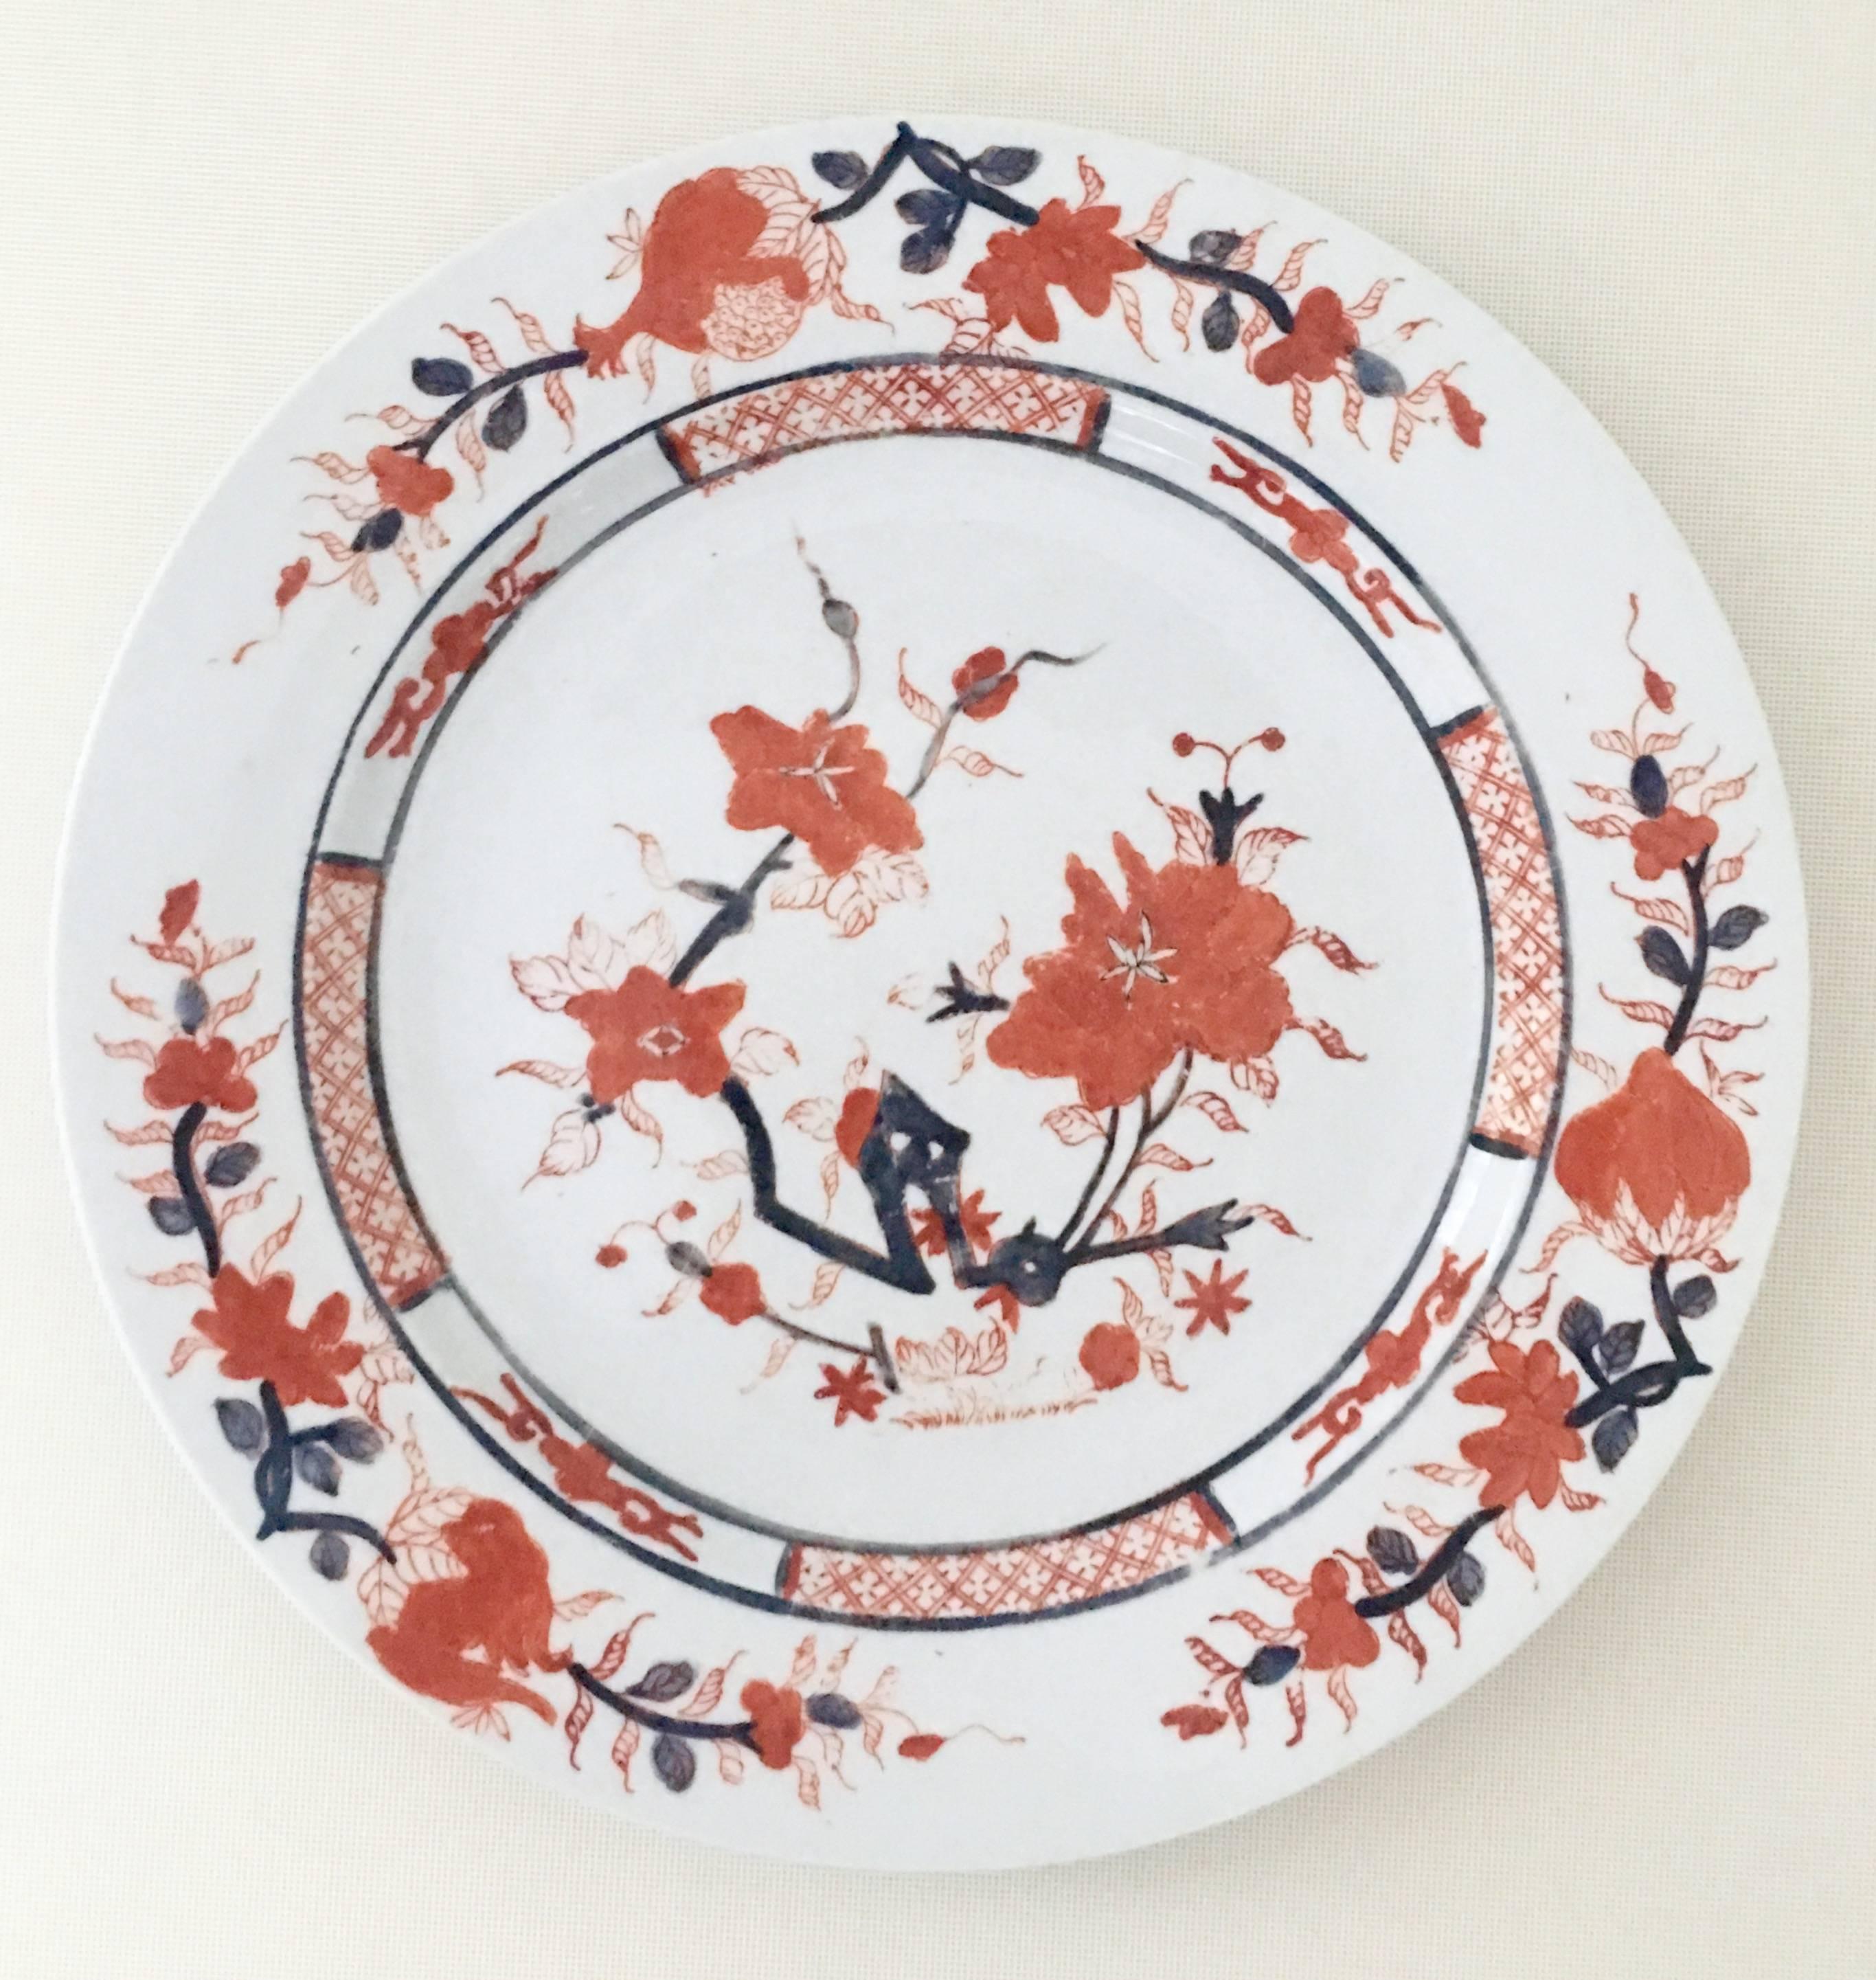 20th Century Japanese Imari porcelain dinnerware, six-three-piece place settings. Features a white ground with 22 karat gold hand-painted and enameled ink blue and red to orange hues. Each piece is marked on the underside, decorated in Hong